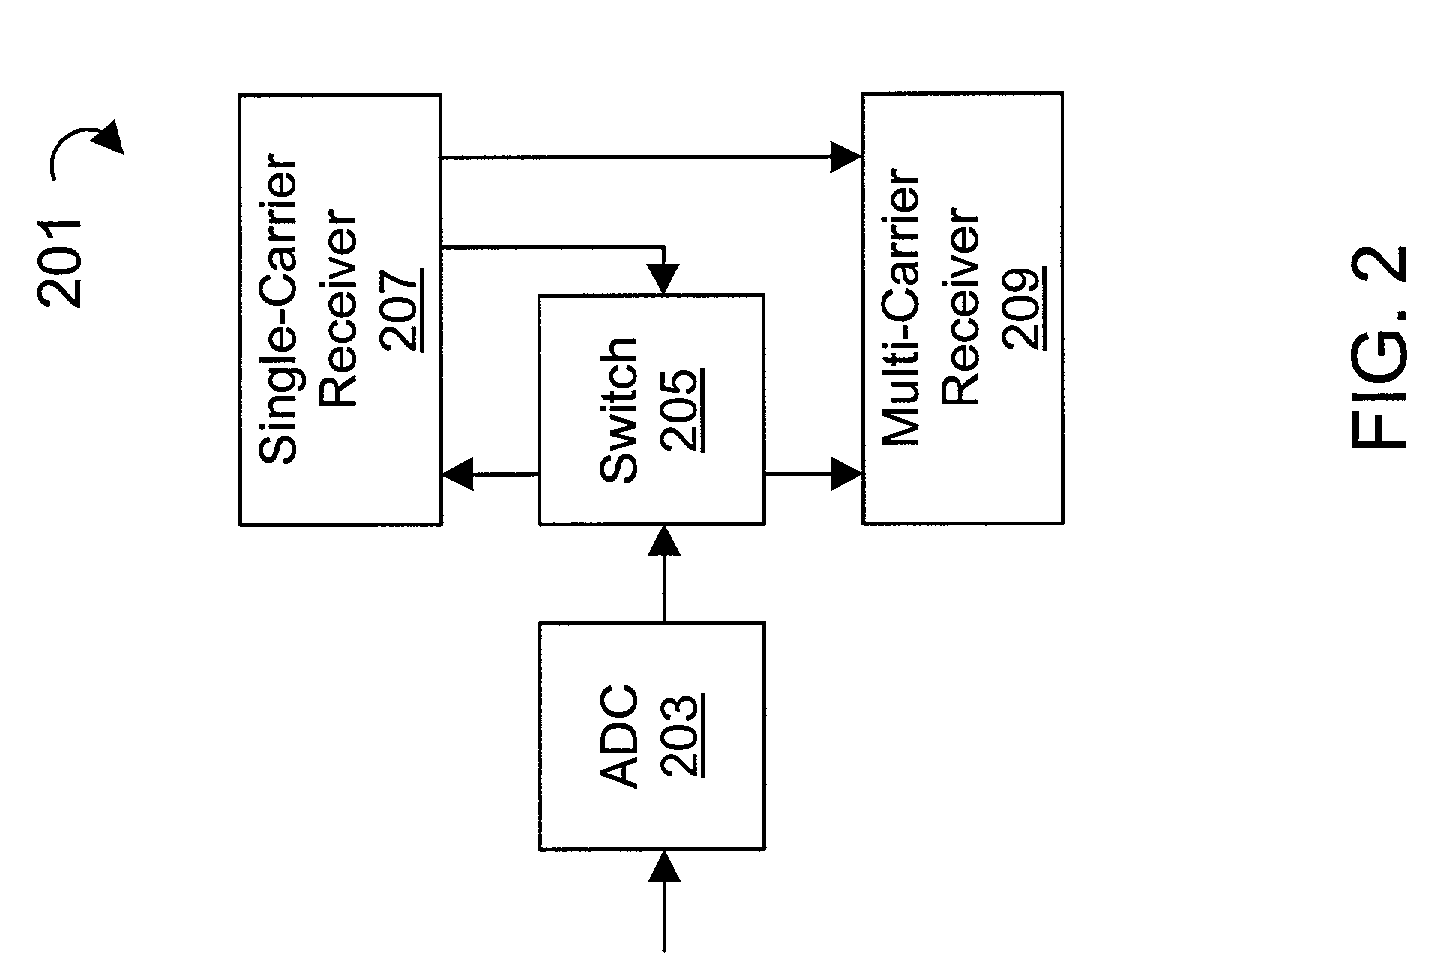 Mixed waveform configuration for wireless communications